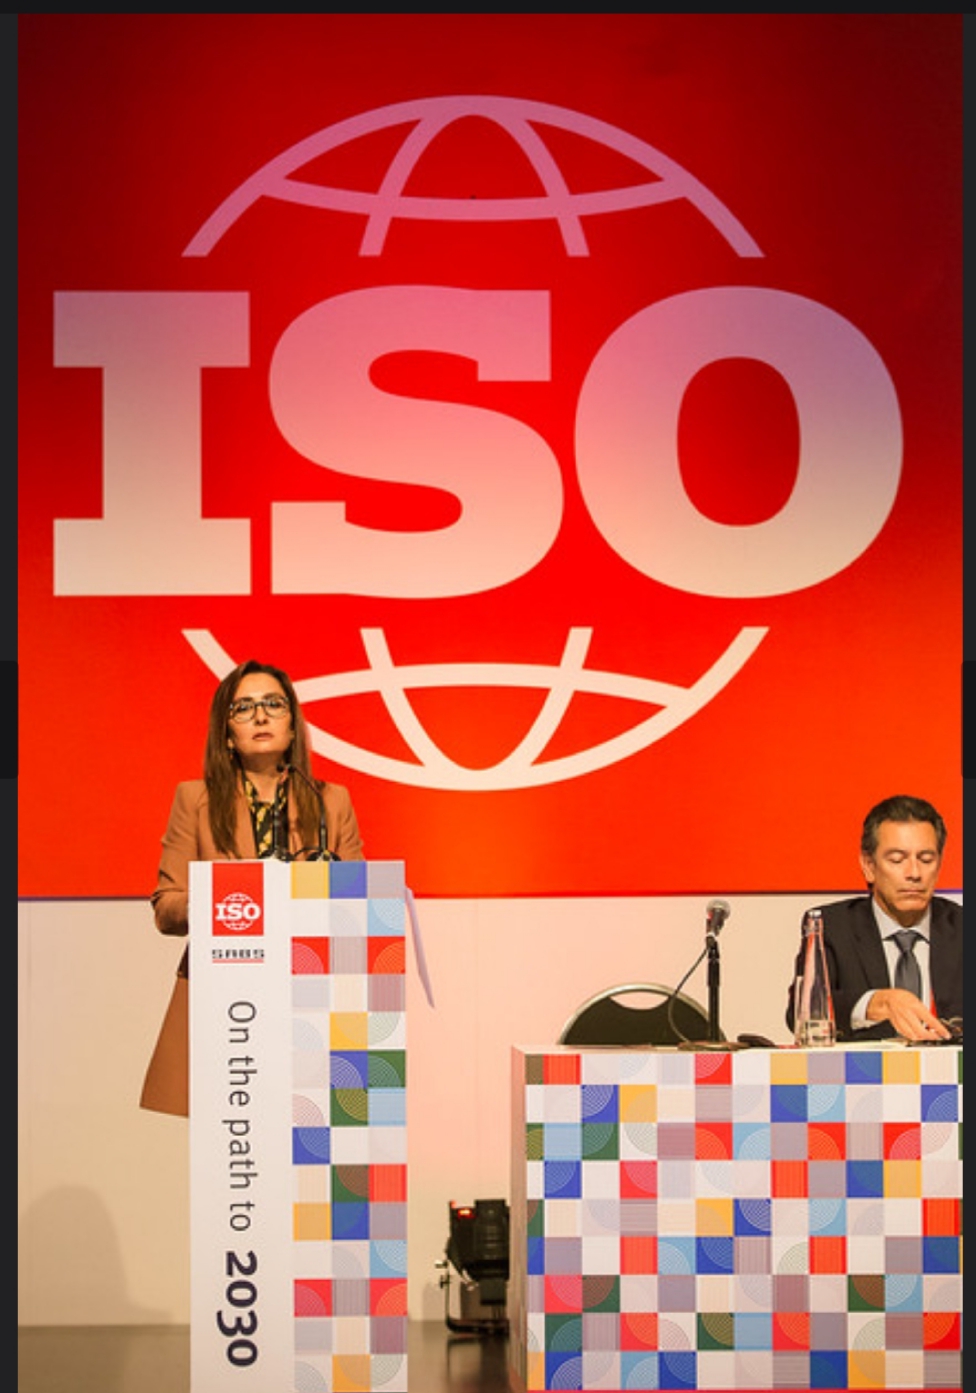  Developing country participation critical to ISO’s future